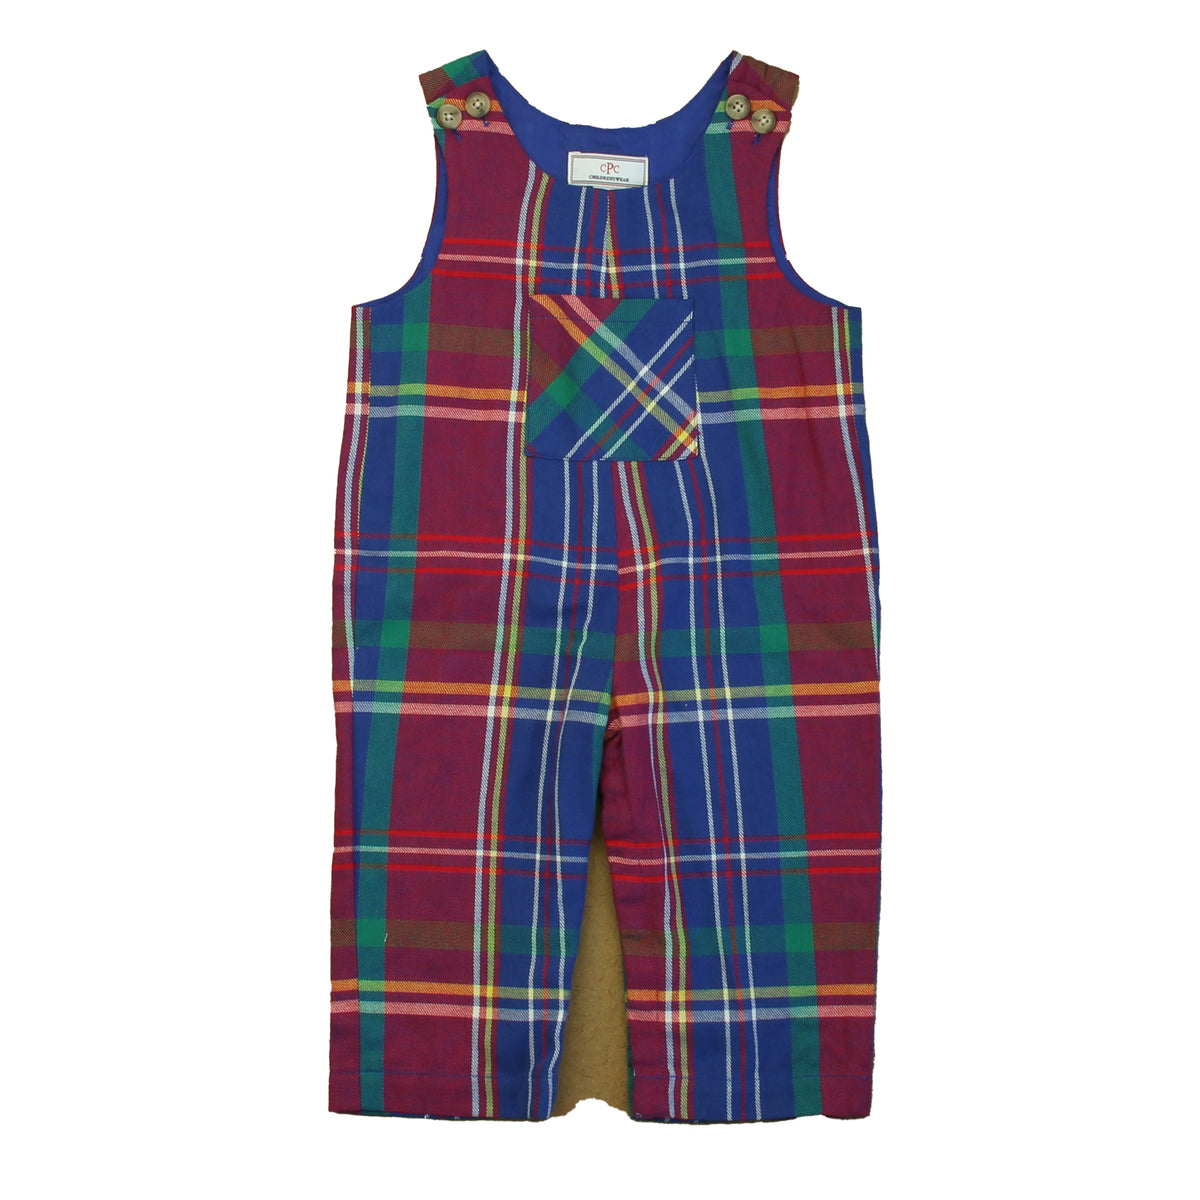 New with Tags: Adirondack Plaid Pants size: 9-12 Months -- FINAL SALE